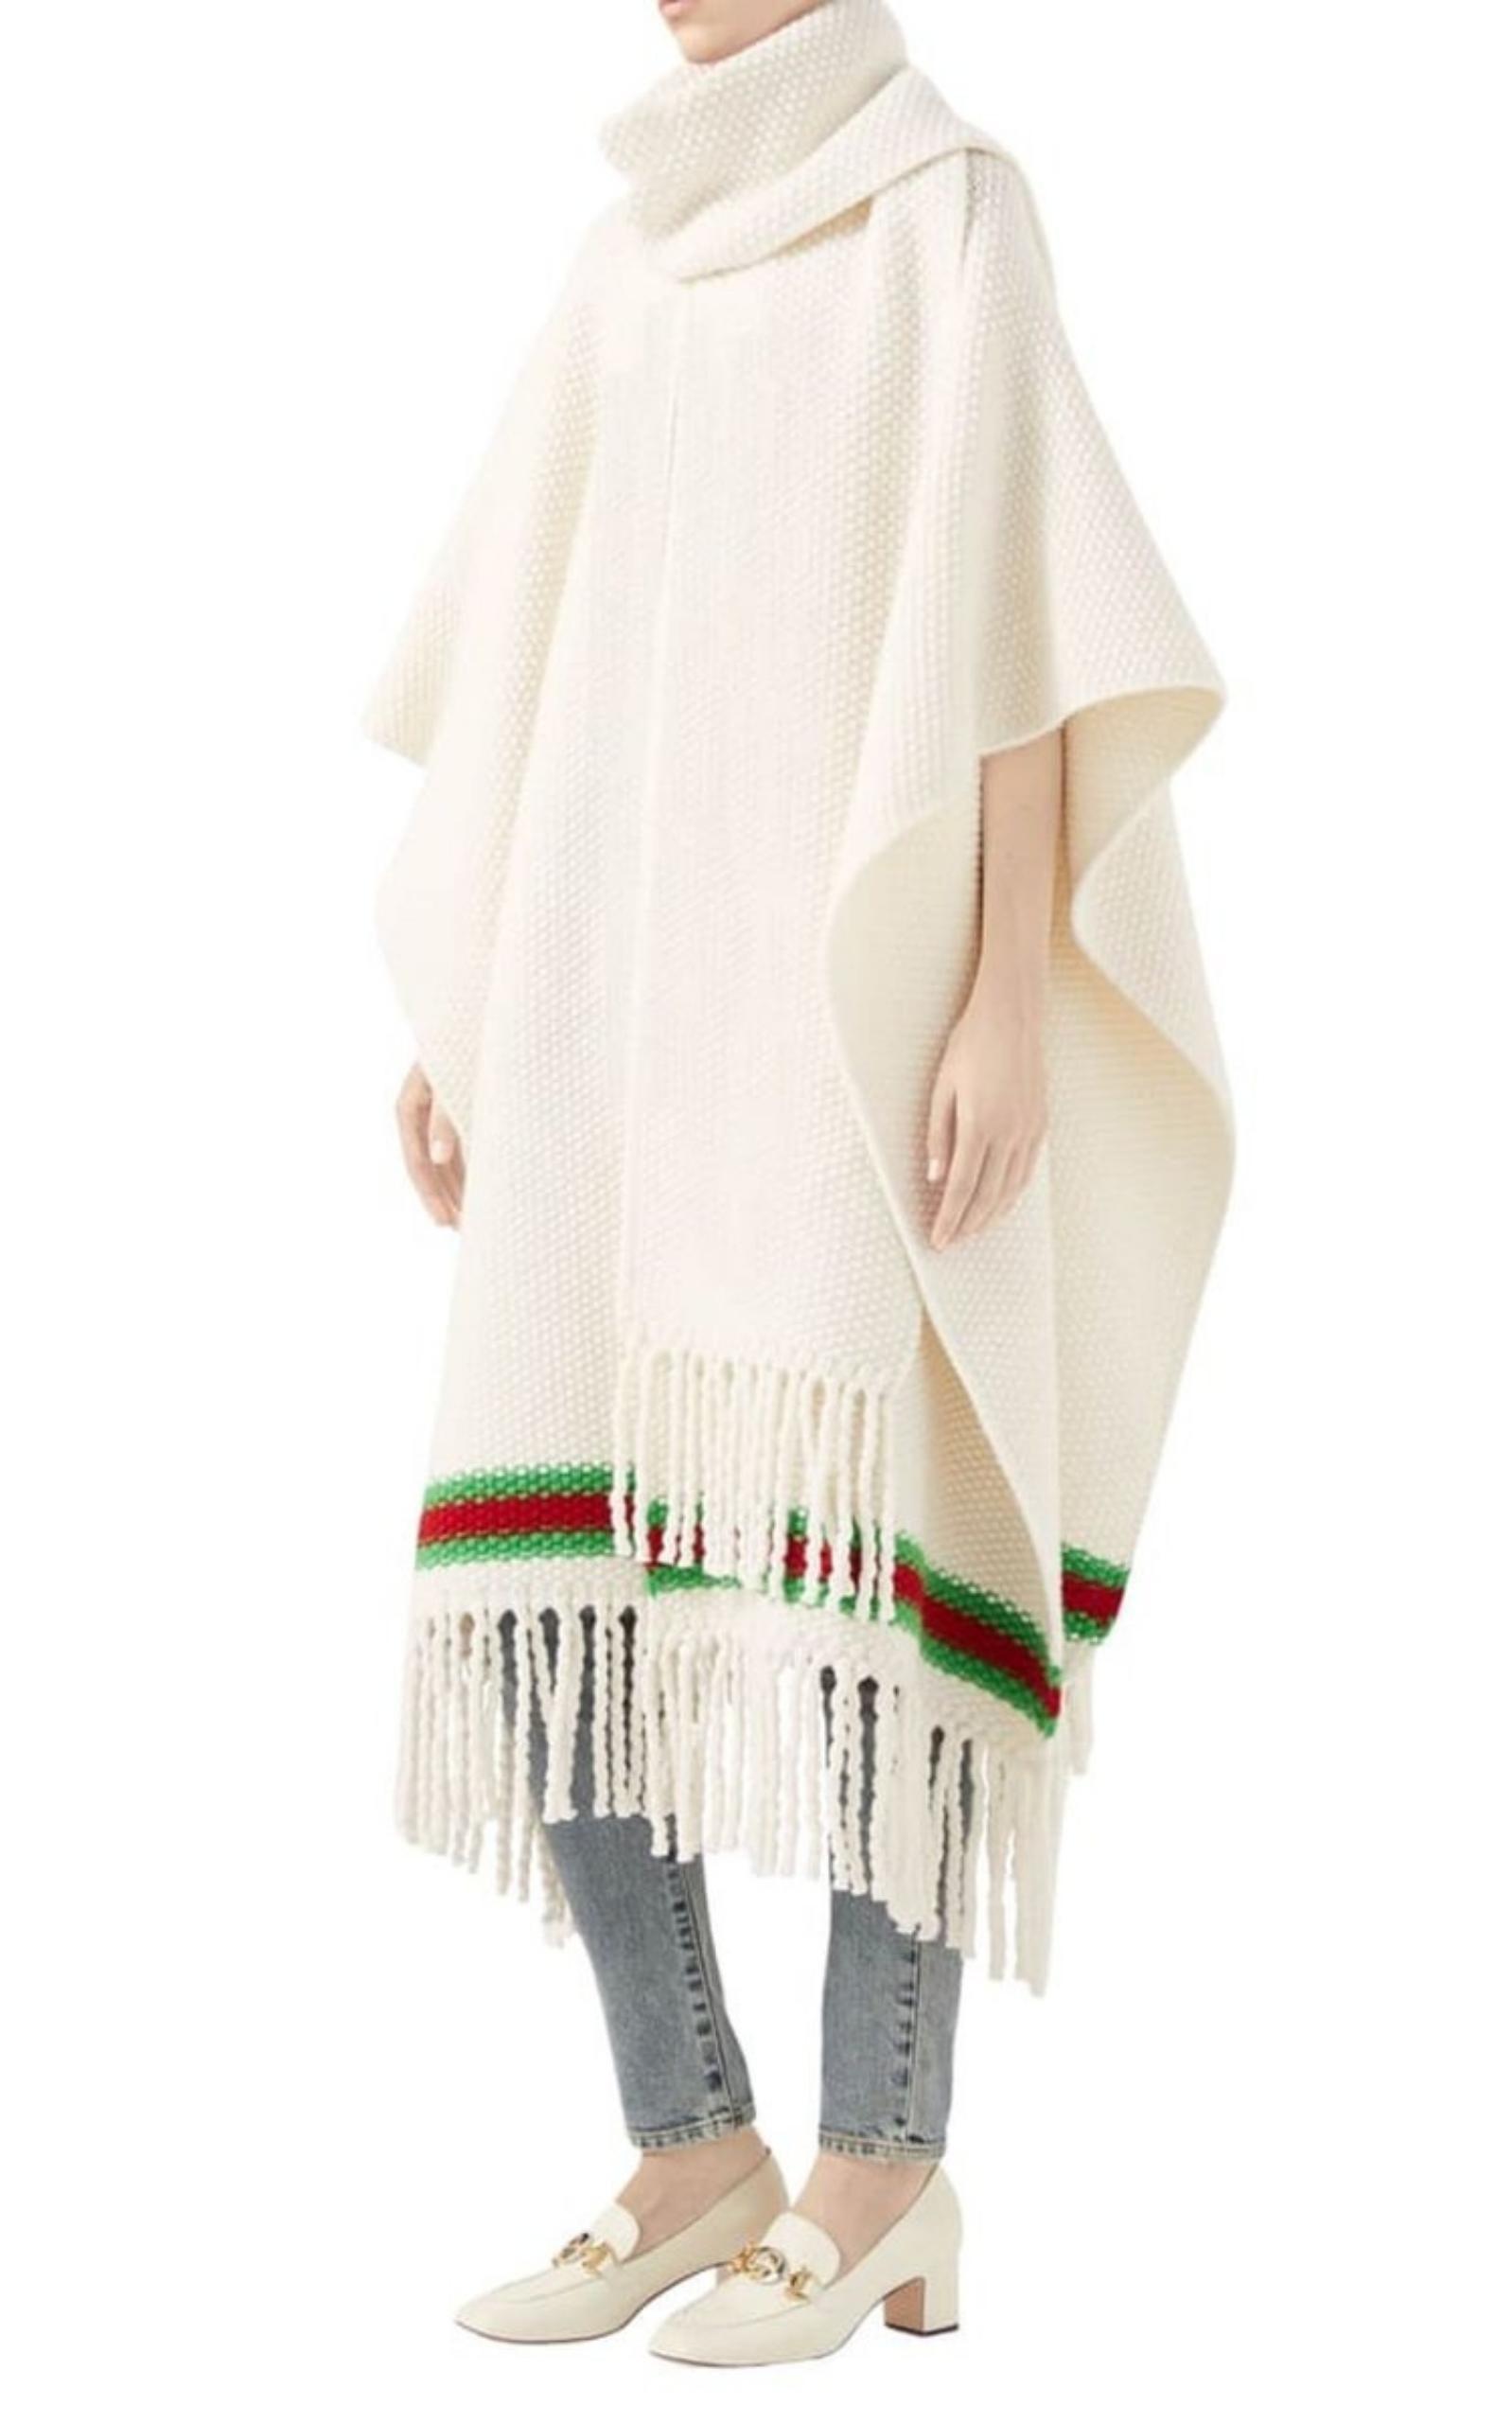  GucciCape with Oversize Wool Scarf - Runway Catalog